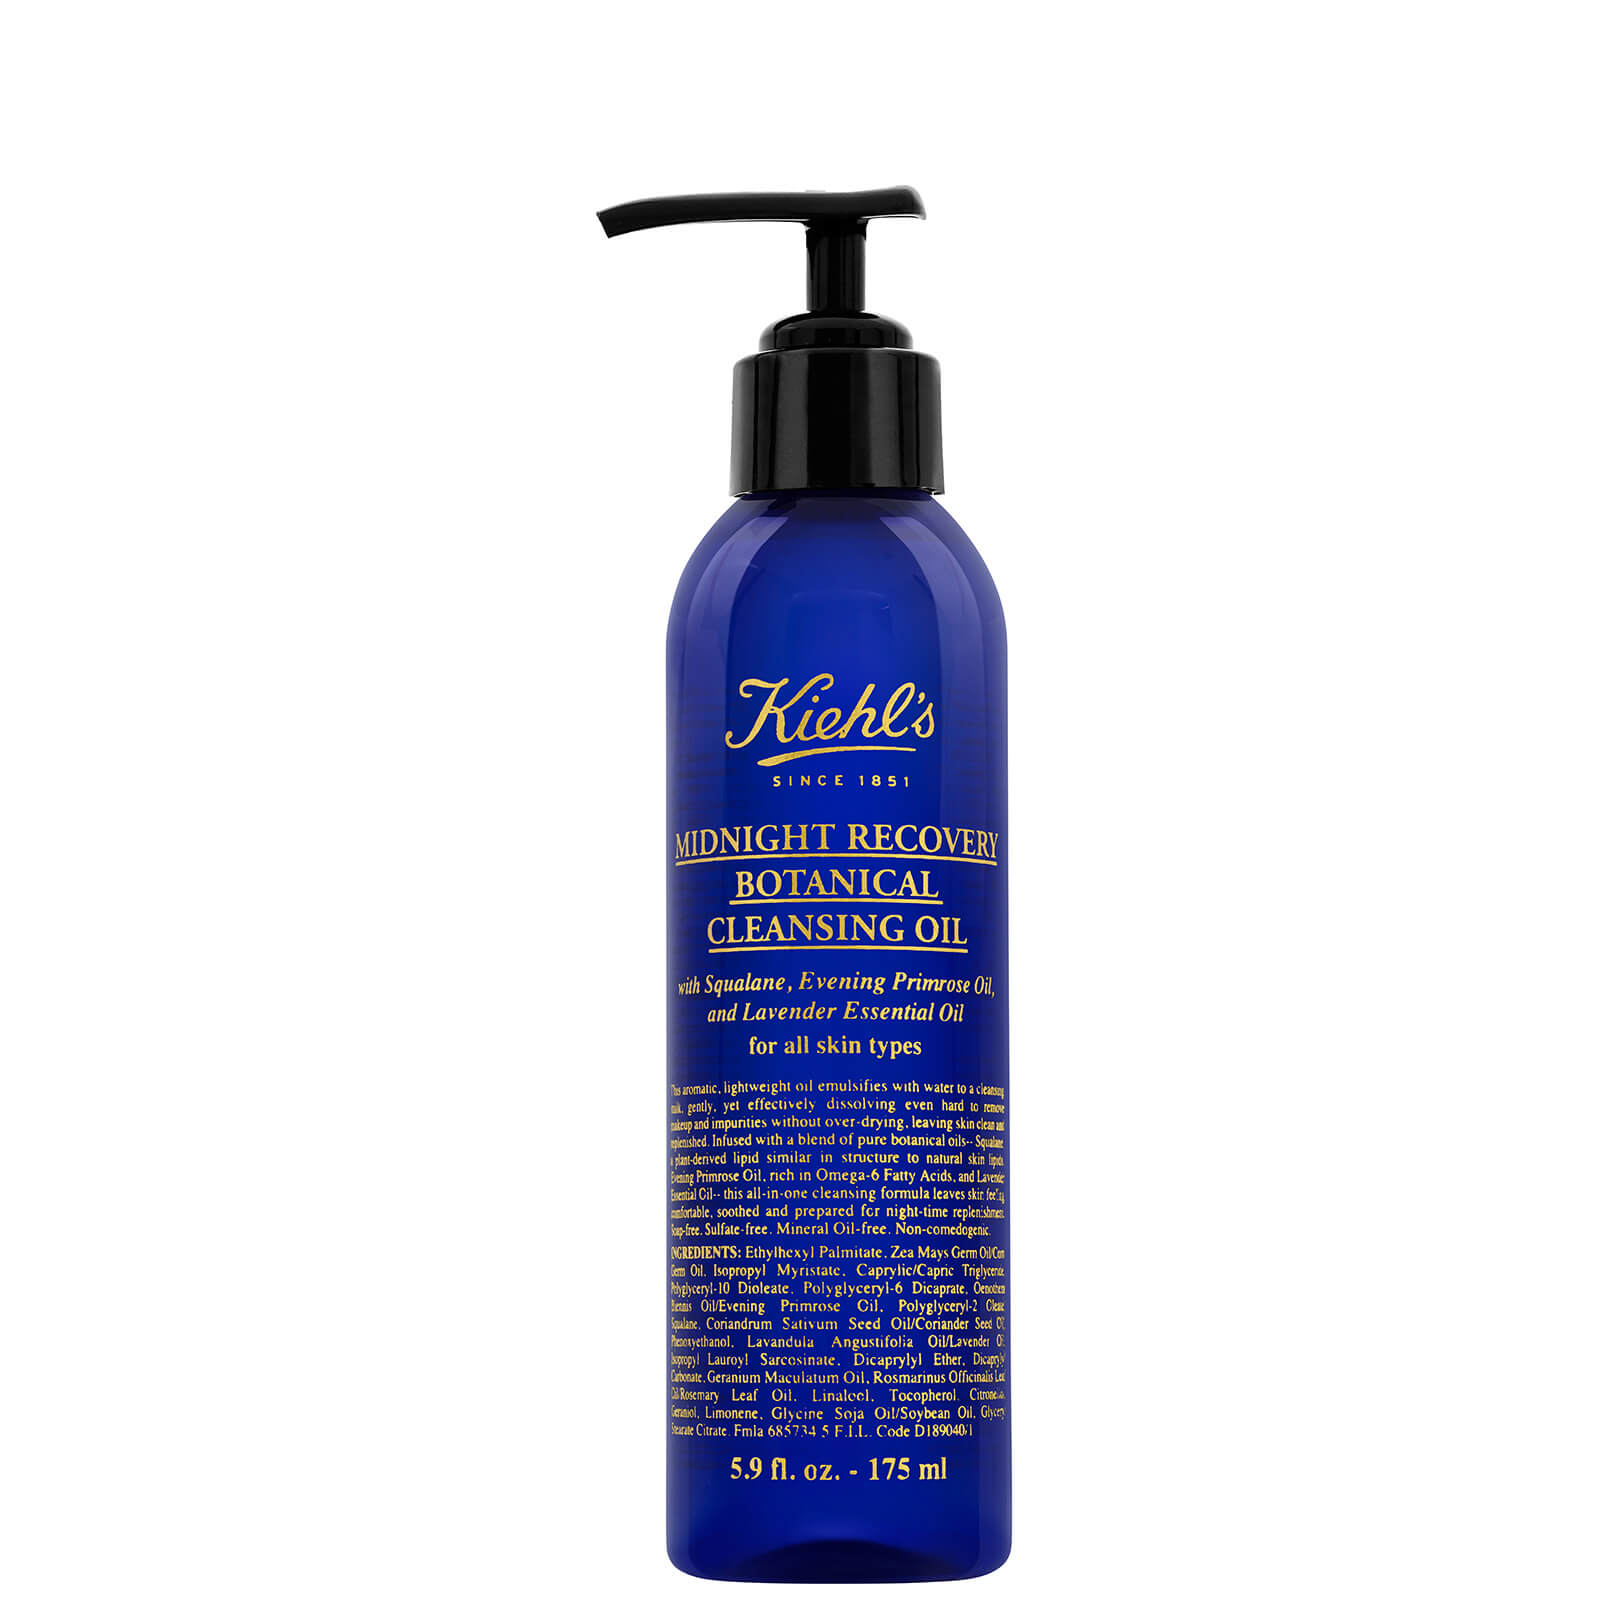 Photos - Facial / Body Cleansing Product Kiehl's Midnight Recovery Botanical Cleansing Oil  - 175ml(Various Sizes)